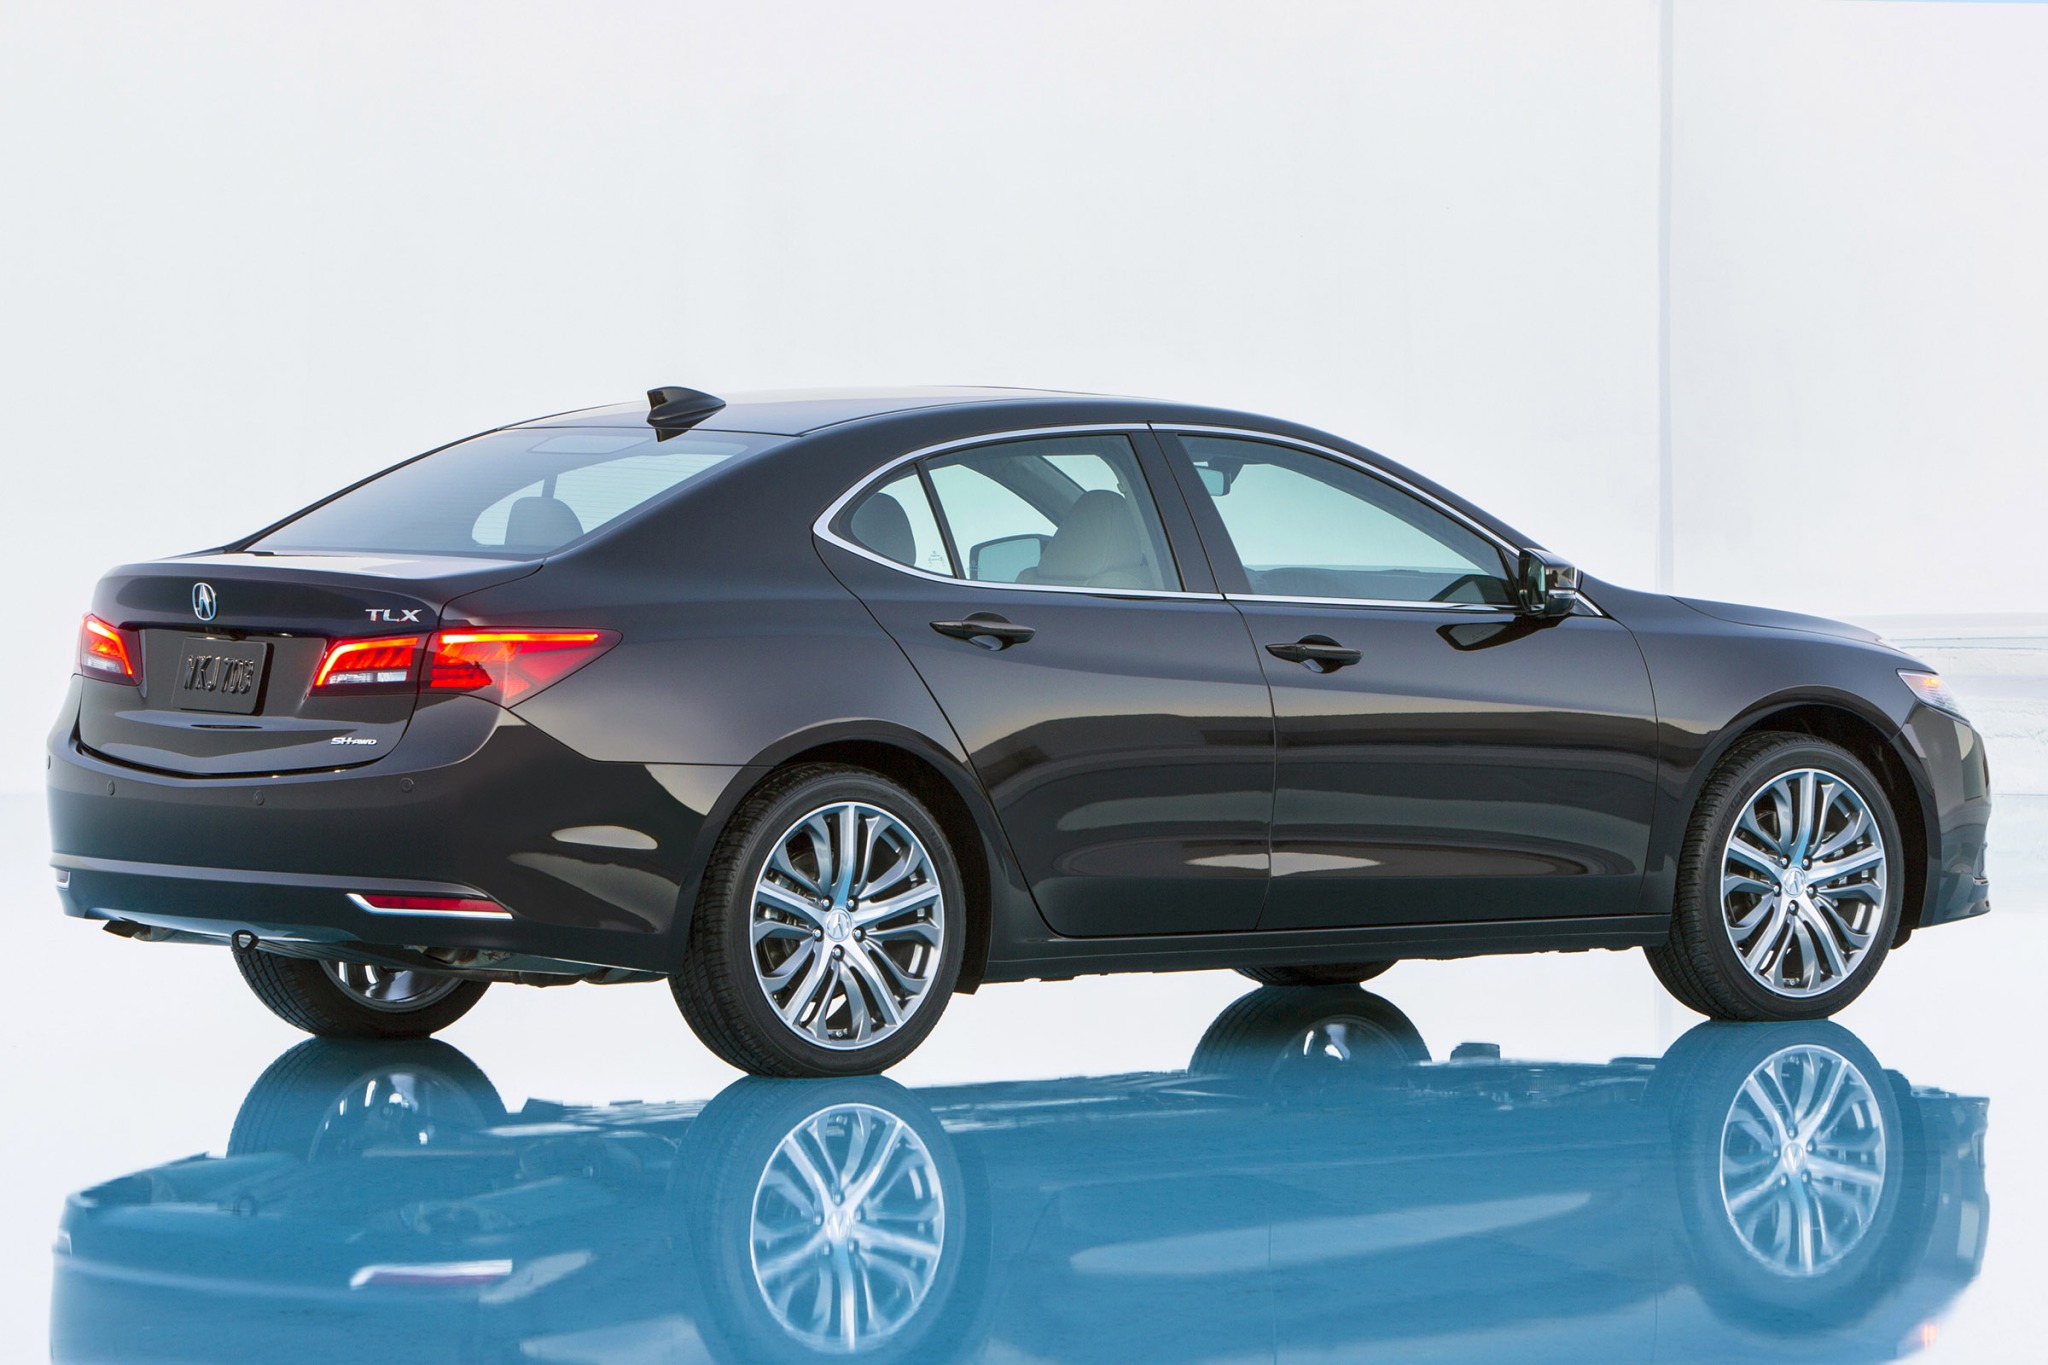 2015 Acura Tlx Vins Configurations Msrp And Specs Autodetective